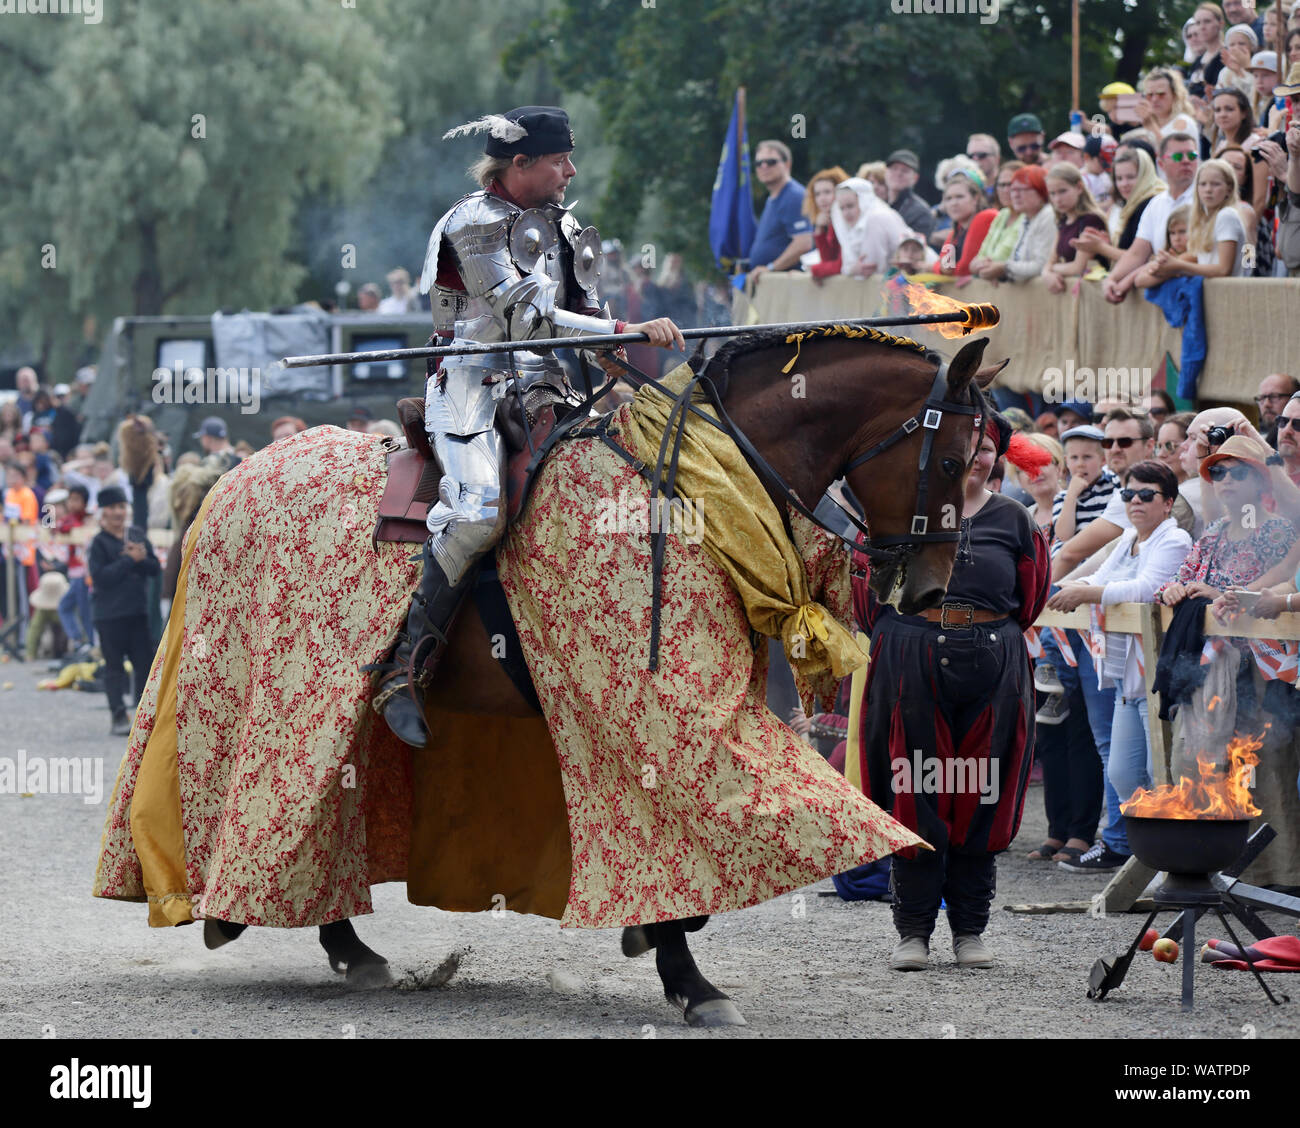 Hameenlinna Finland 08/17/2019 Medieval festival with craftsman, knights and entertainers. A parade with fire. A knight riding with his handsome horse Stock Photo